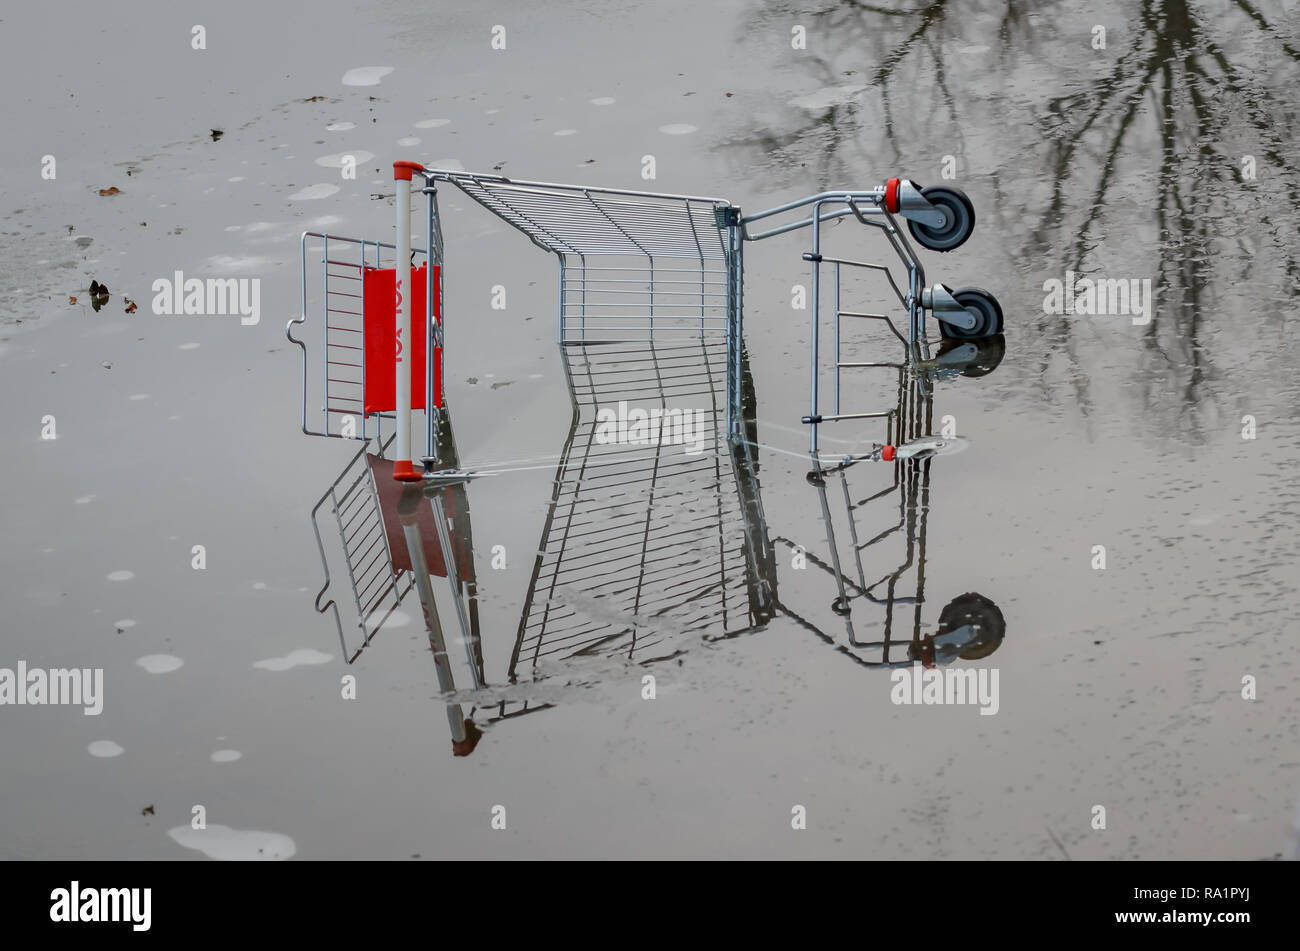 Someone has dumped a shopping cart. Stock Photo